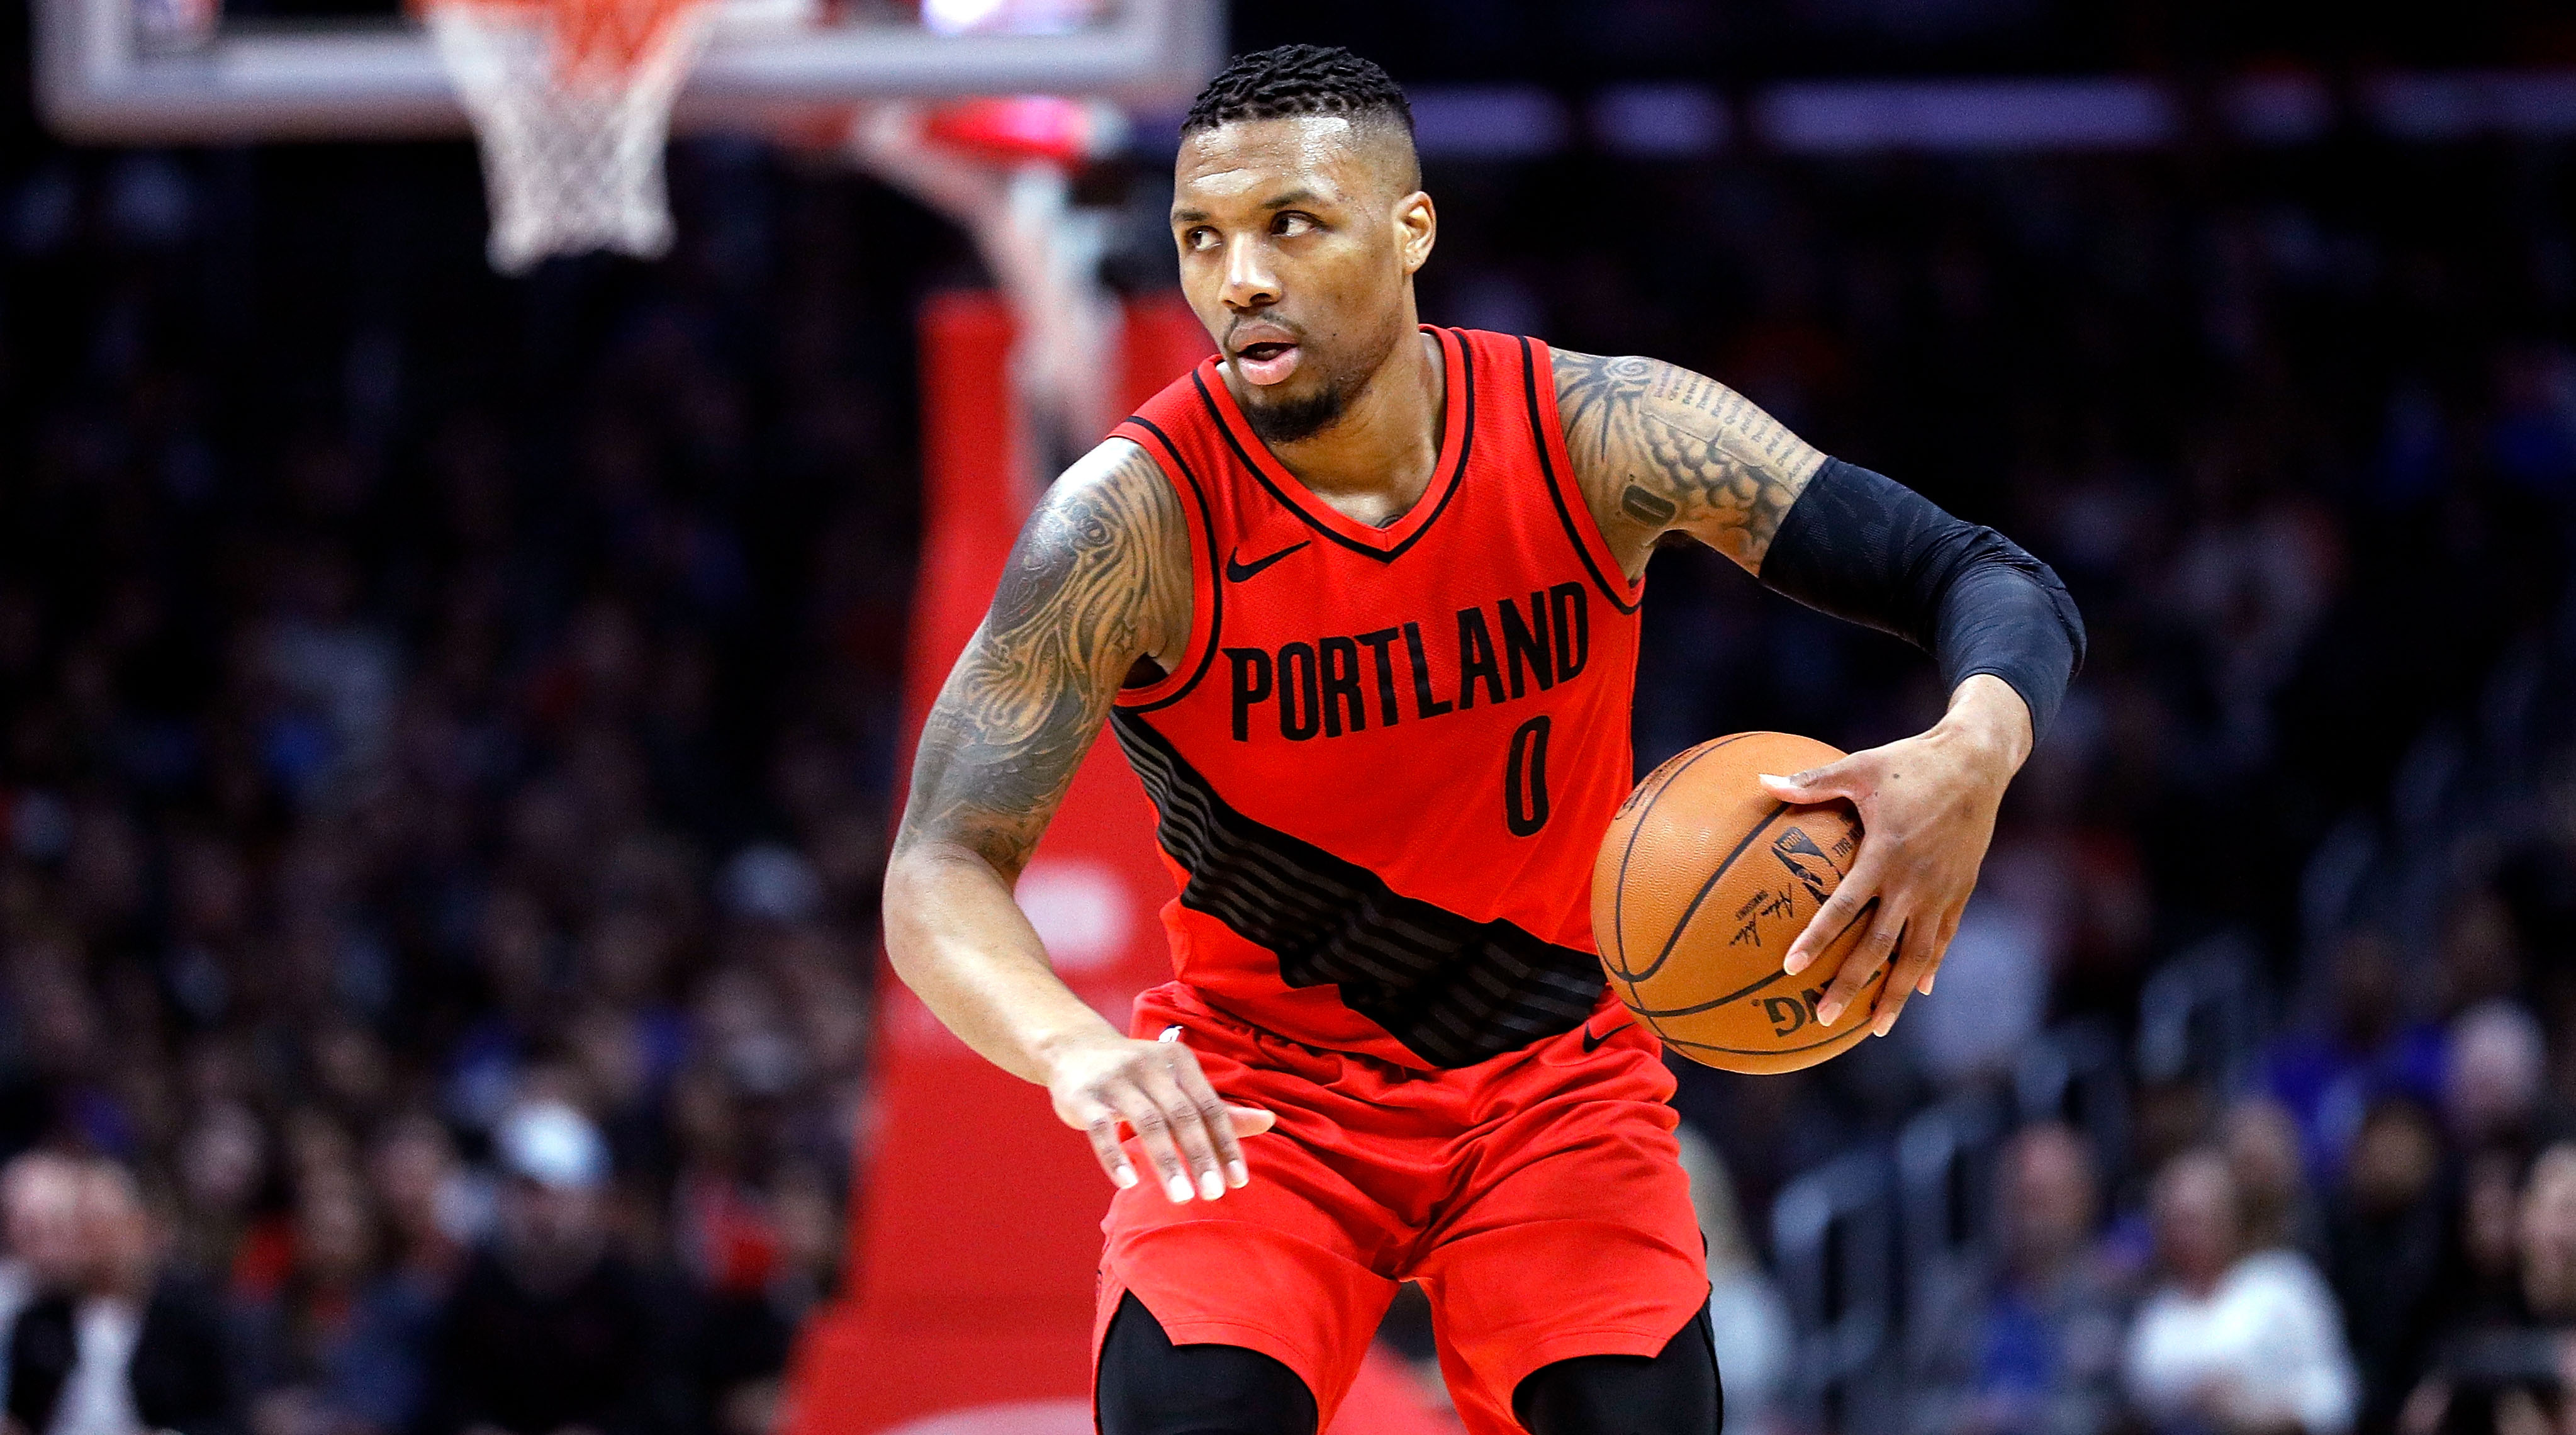 Damian Lillard Wallpapers 🏀 APK for Android Download